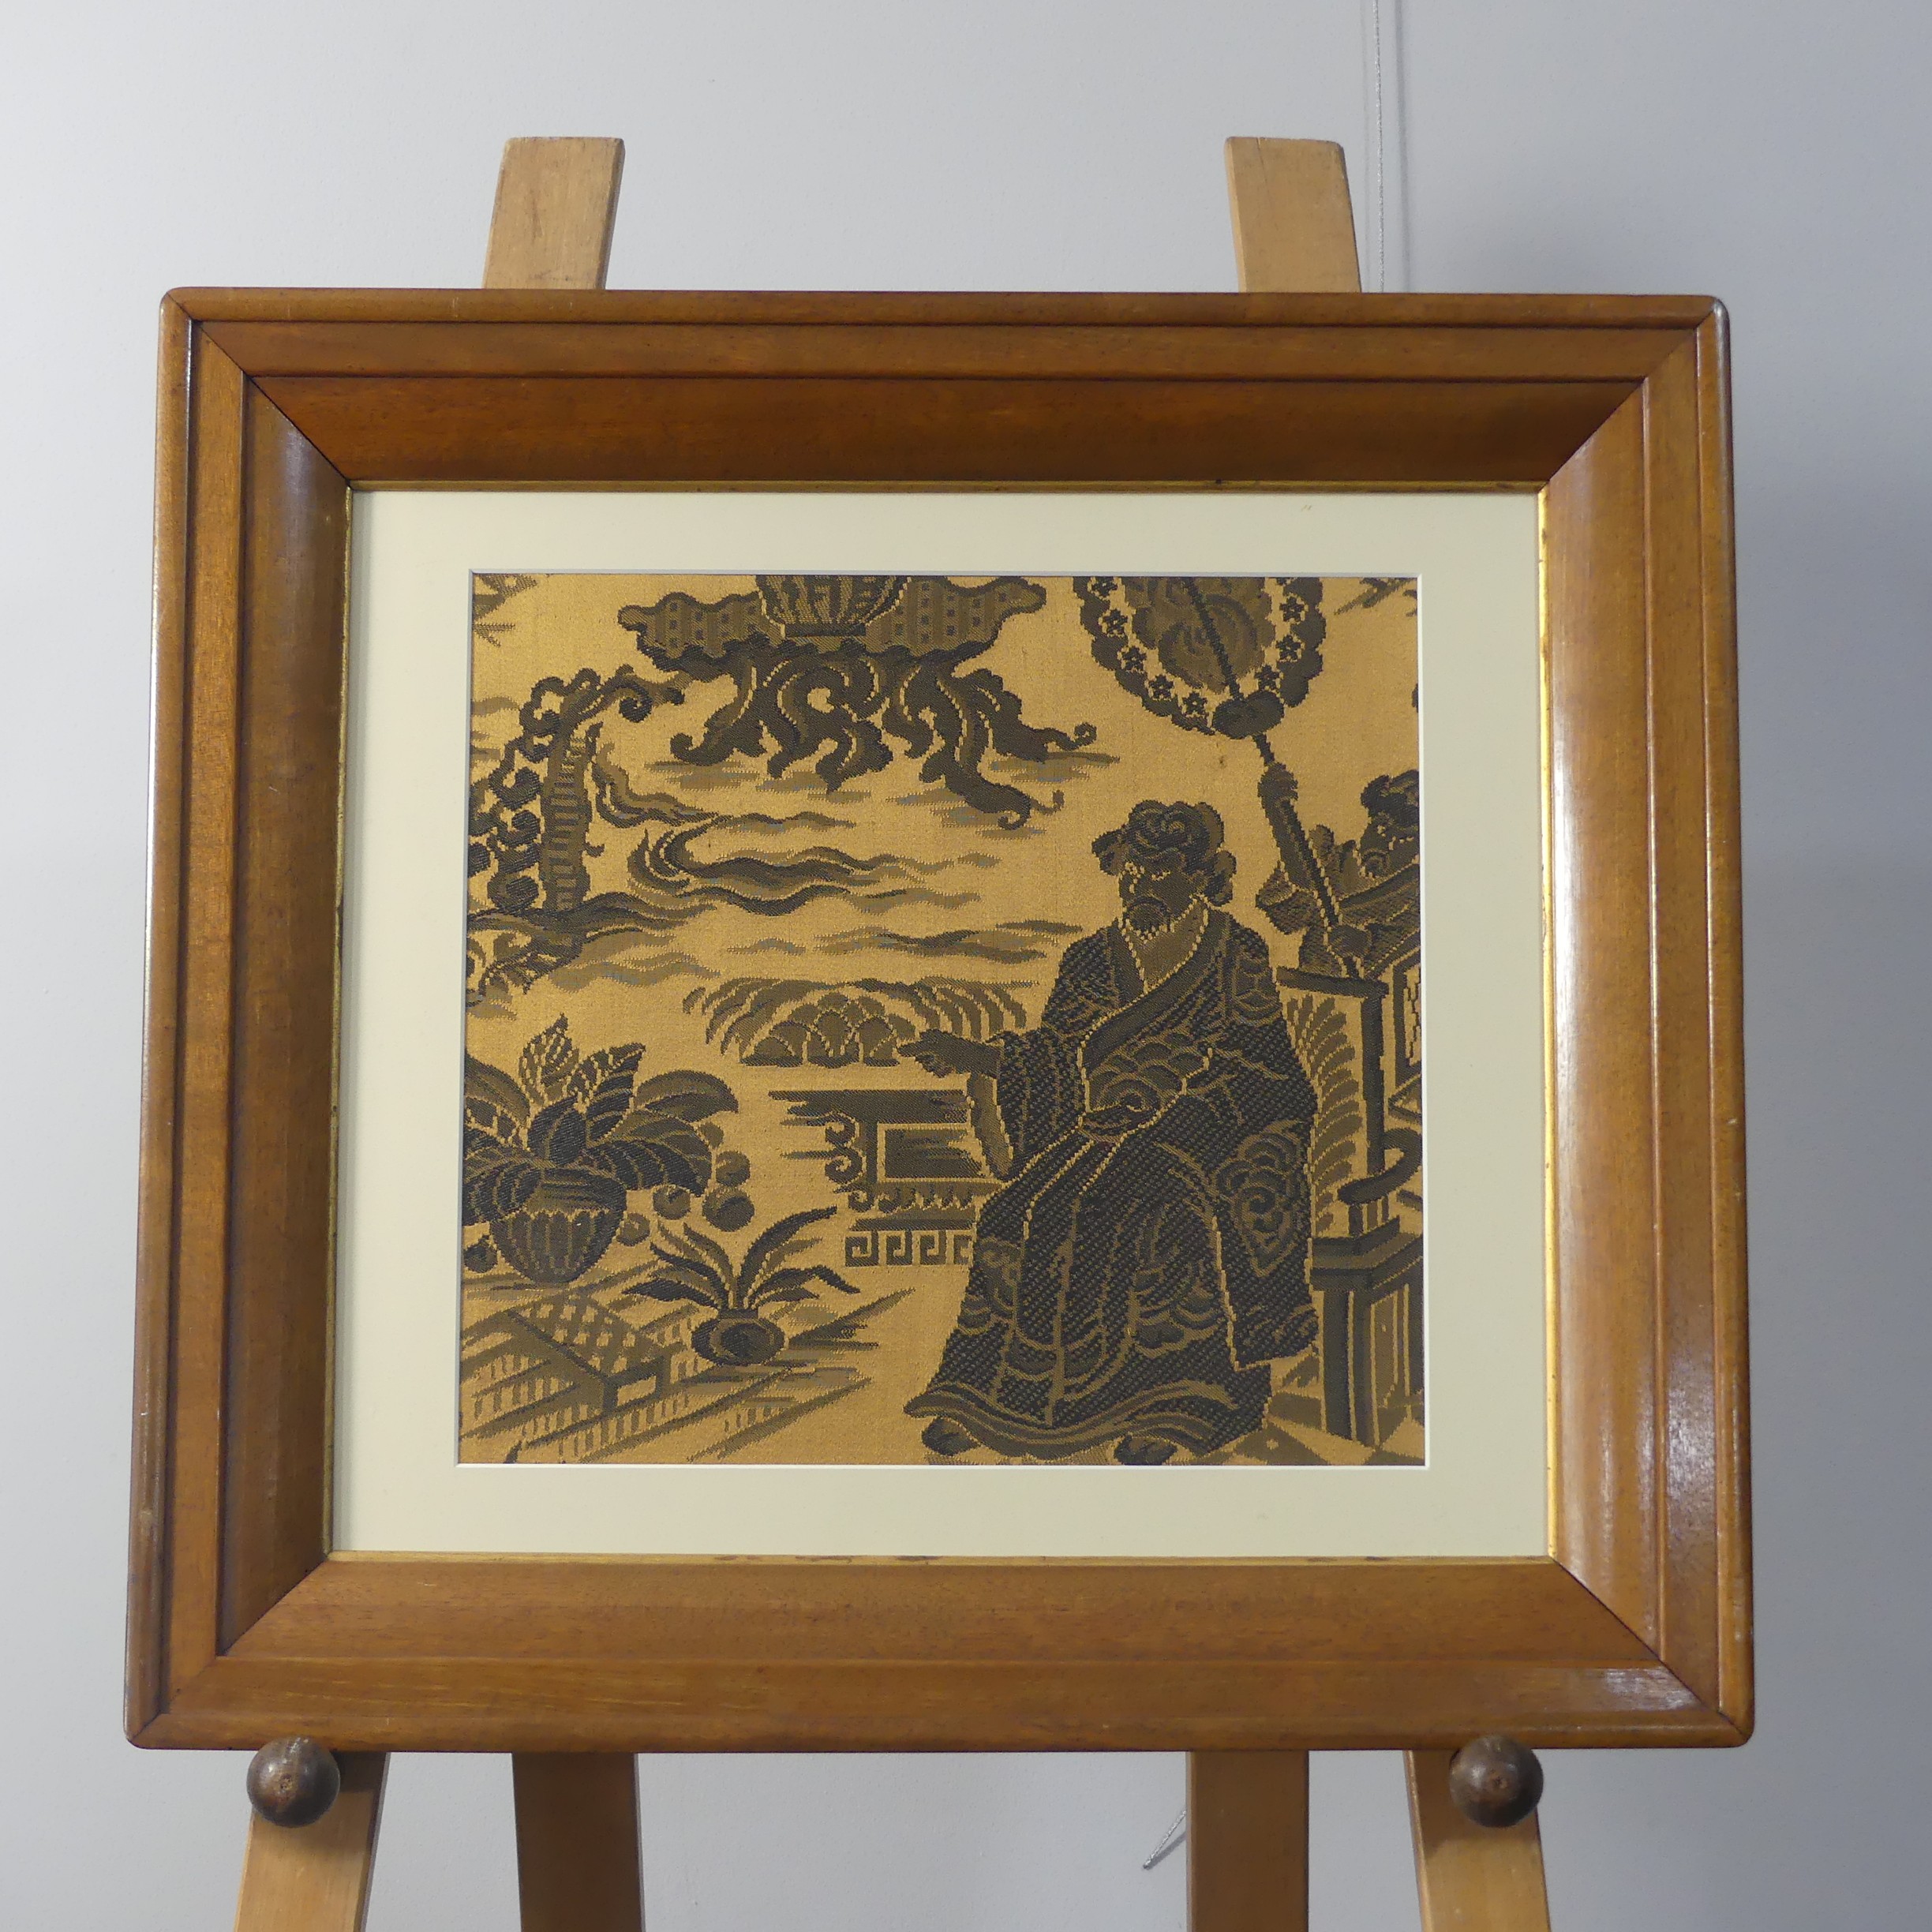 A Chinese woven silk Panel, depicting an elder on a throne among clouds, overmounted, framed in a - Image 2 of 4